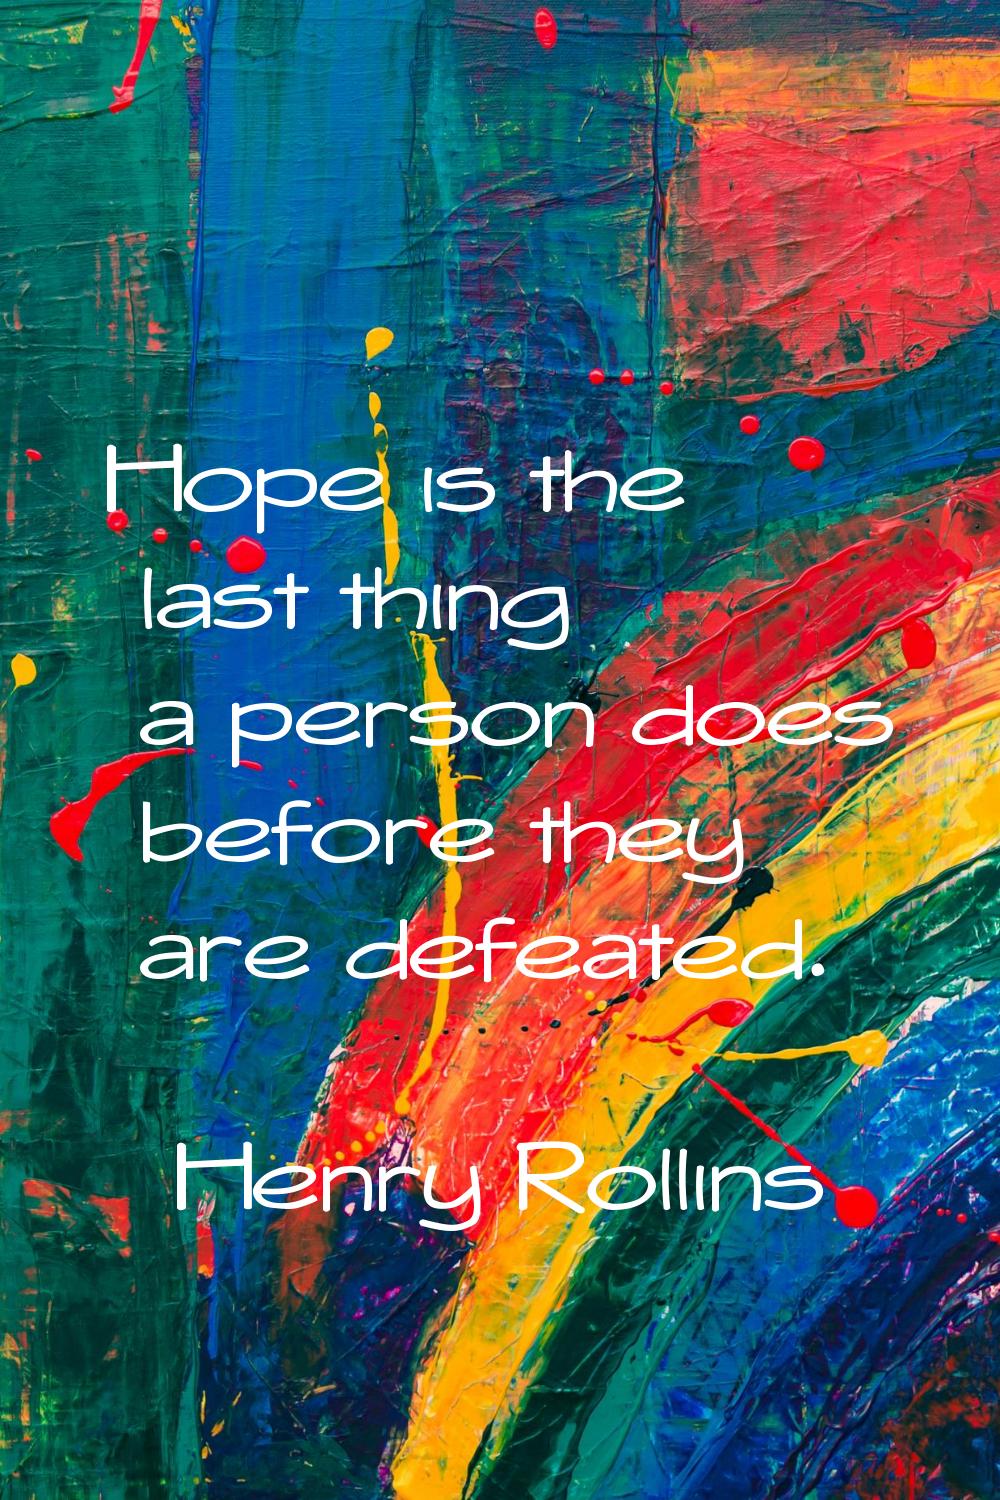 Hope is the last thing a person does before they are defeated.